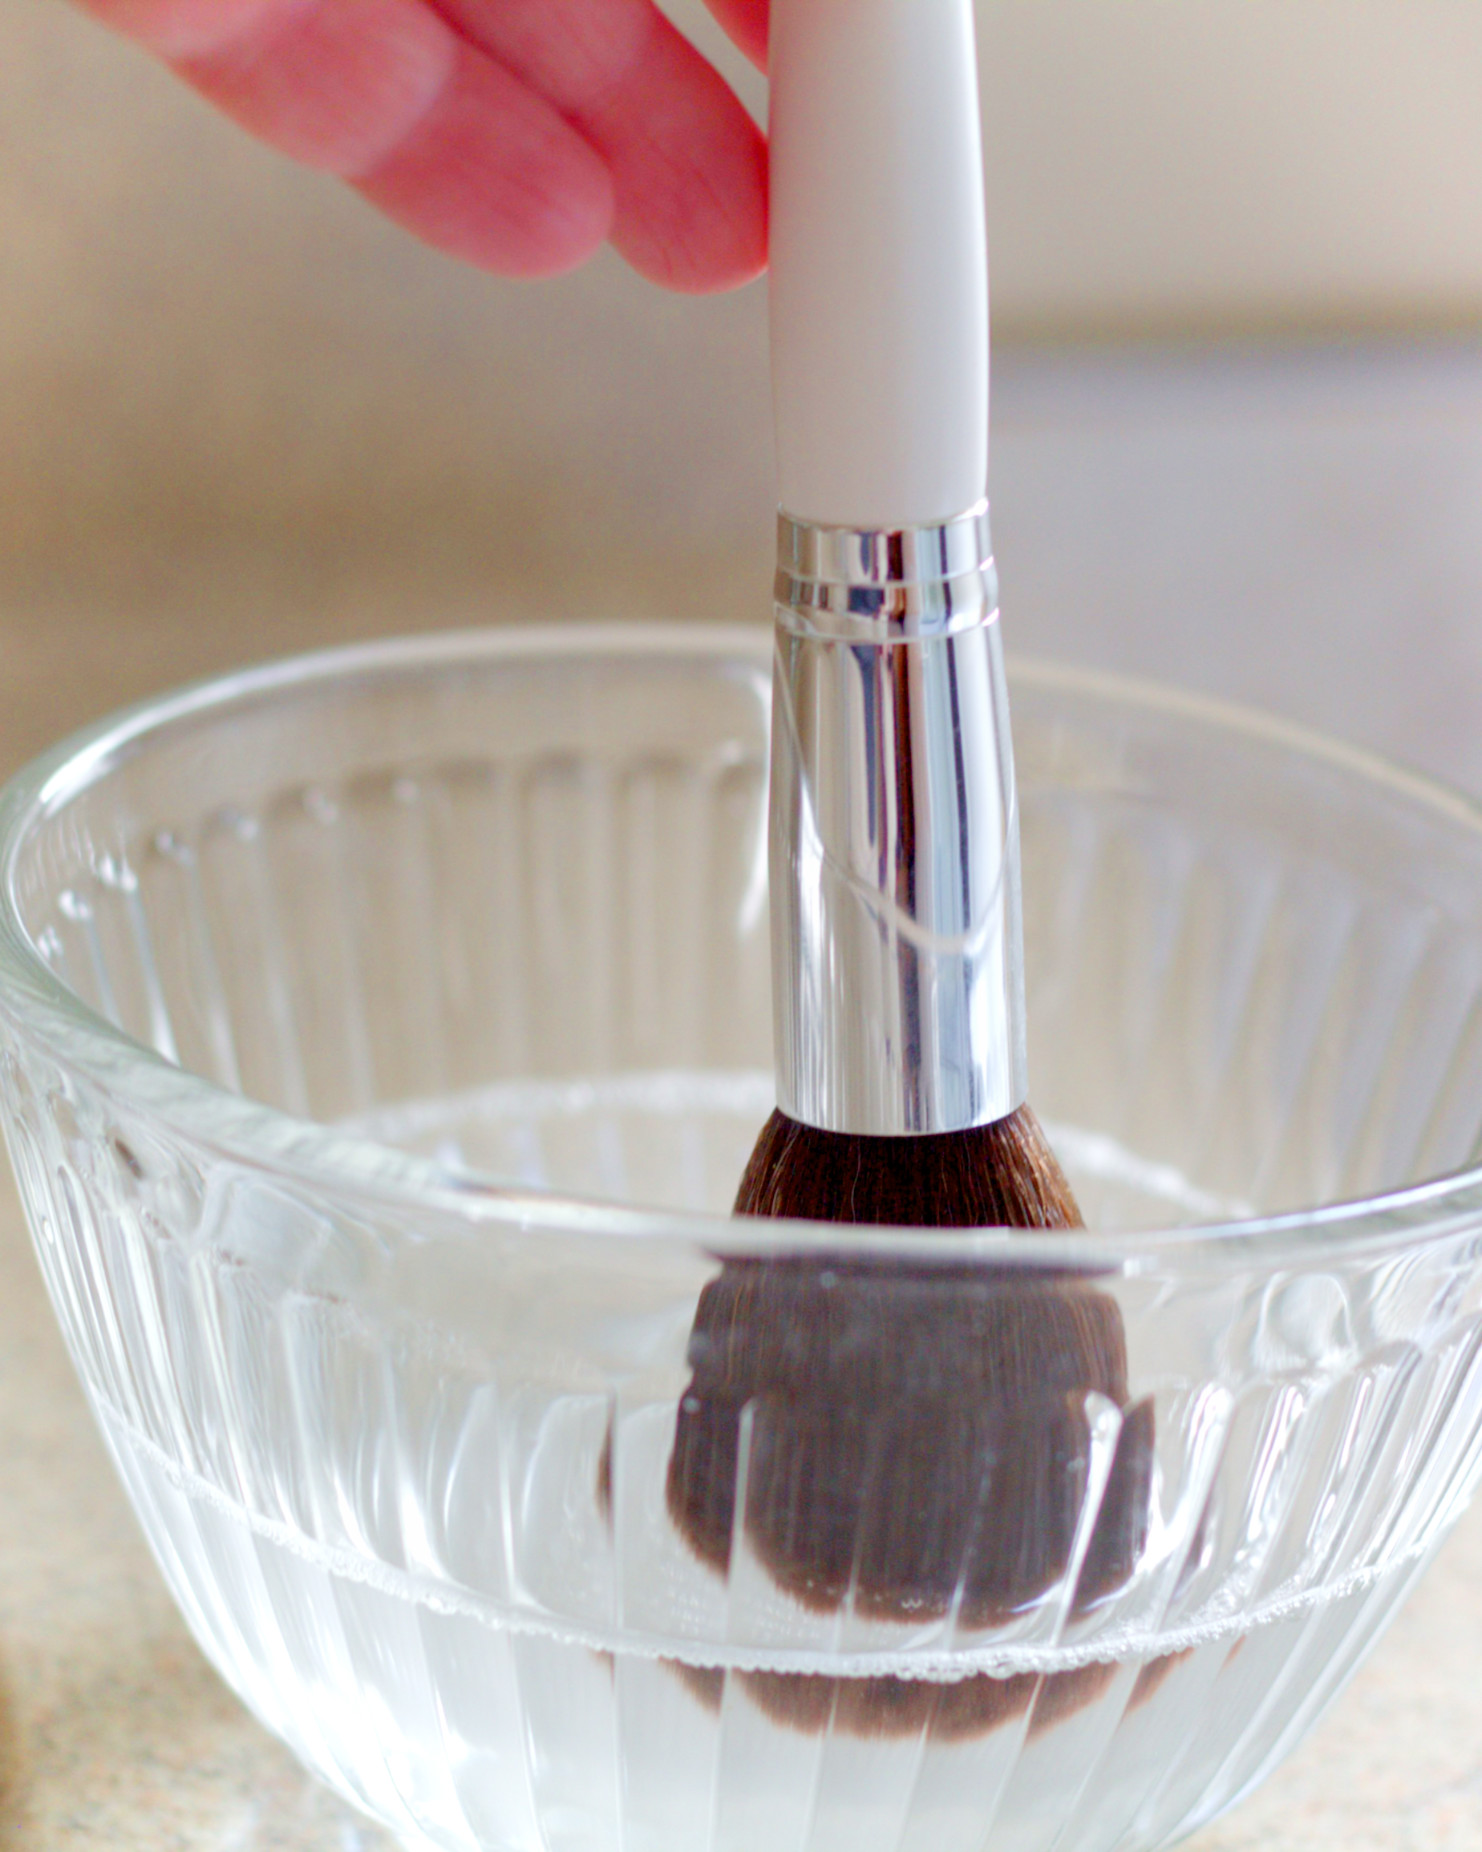 Cleaning A Makeup Brush In A Bowl Of Water Mixed With Cleanser